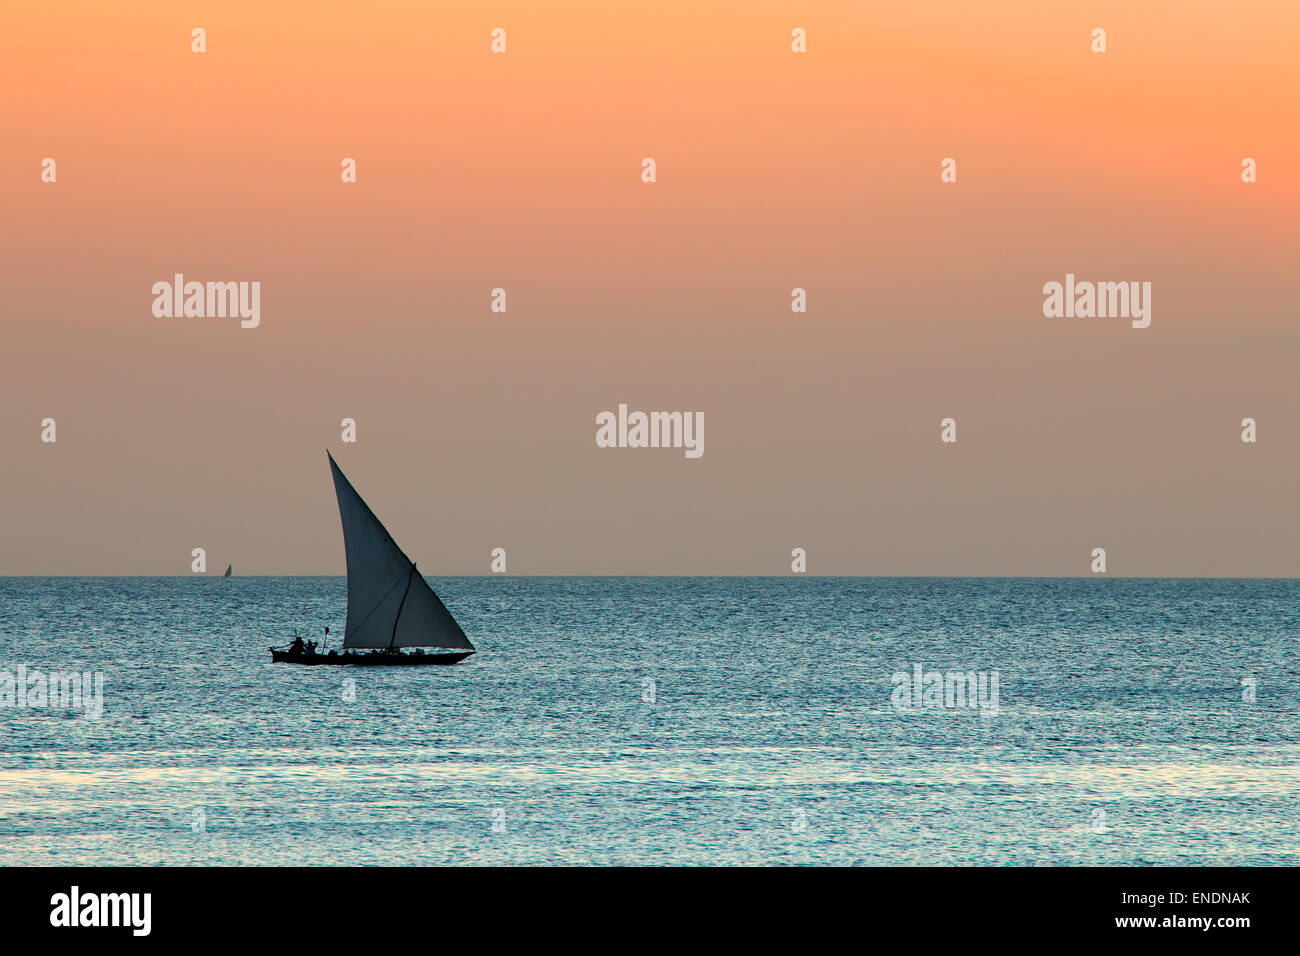 Silhouette of a small sailboat (dhow) on water at sunset, Zanzibar island Stock Photo